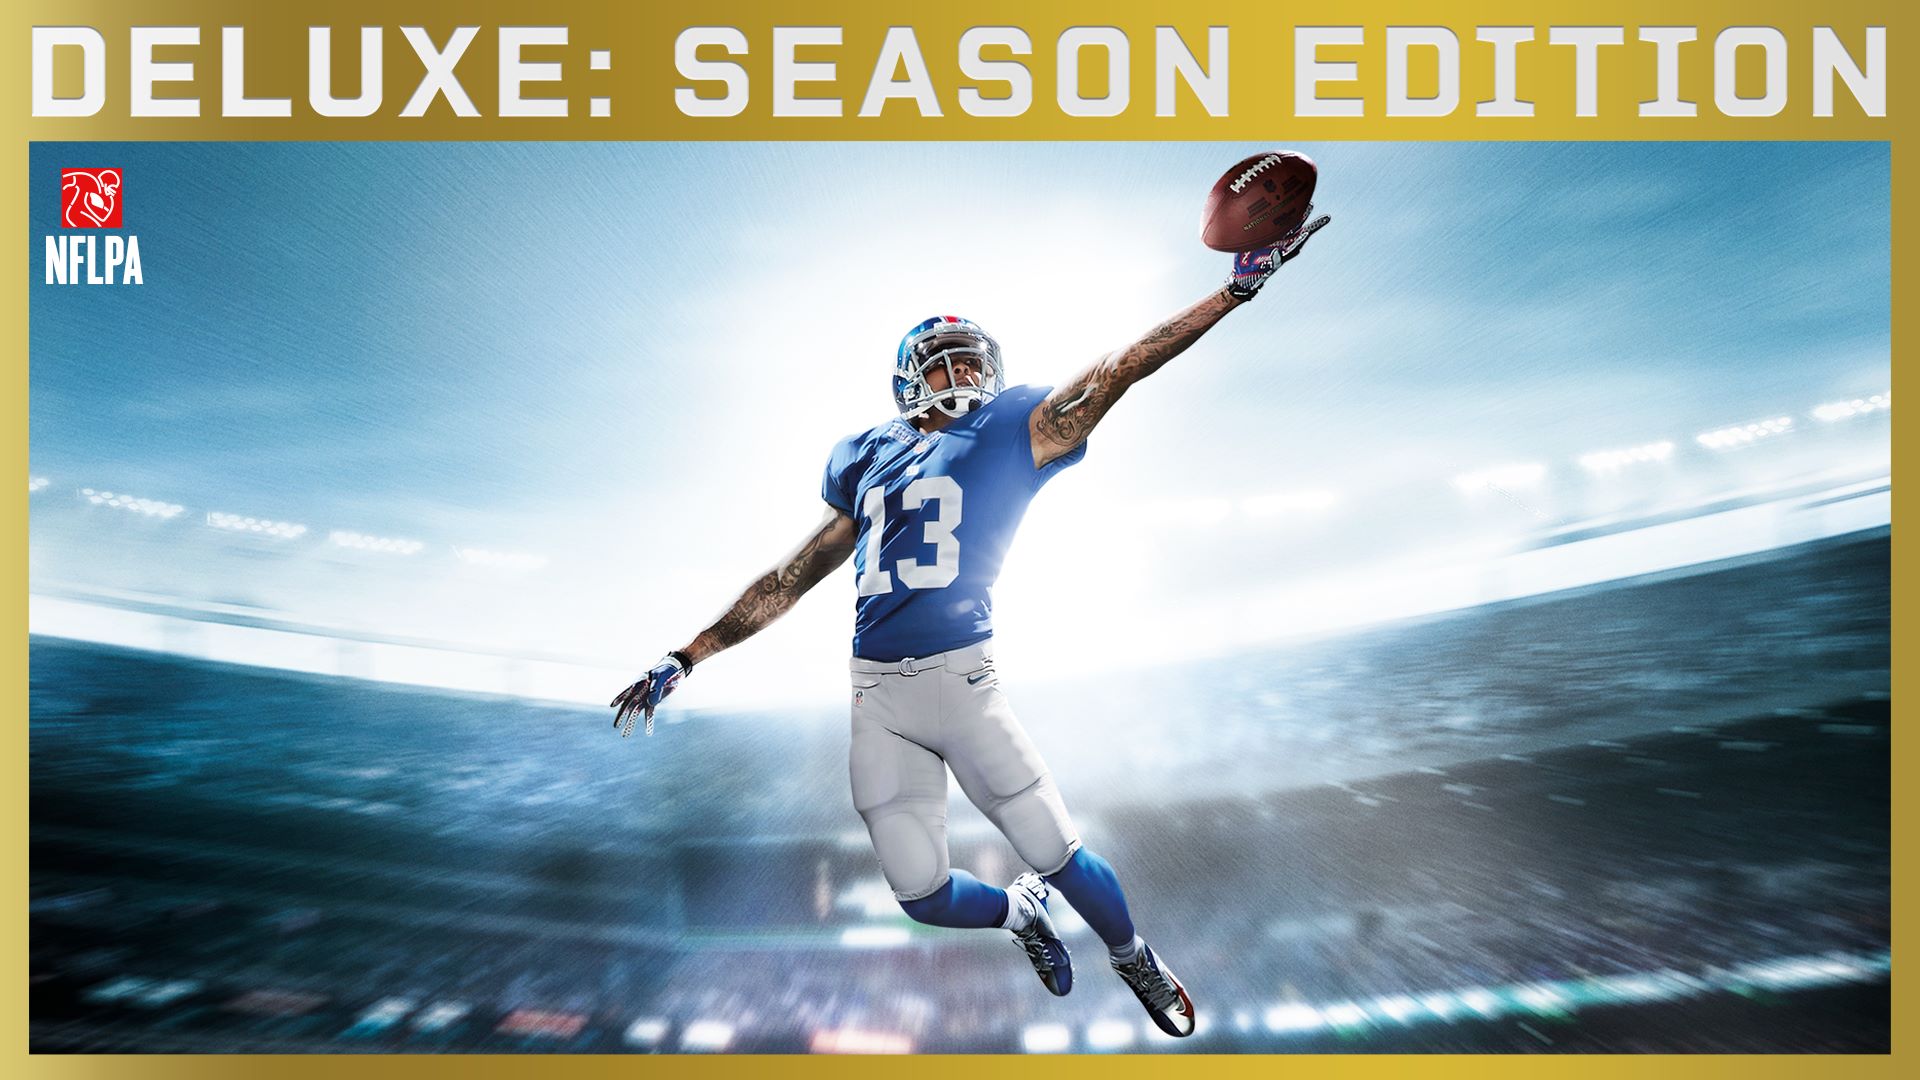 Madden NFL 16 Deluxe Edition